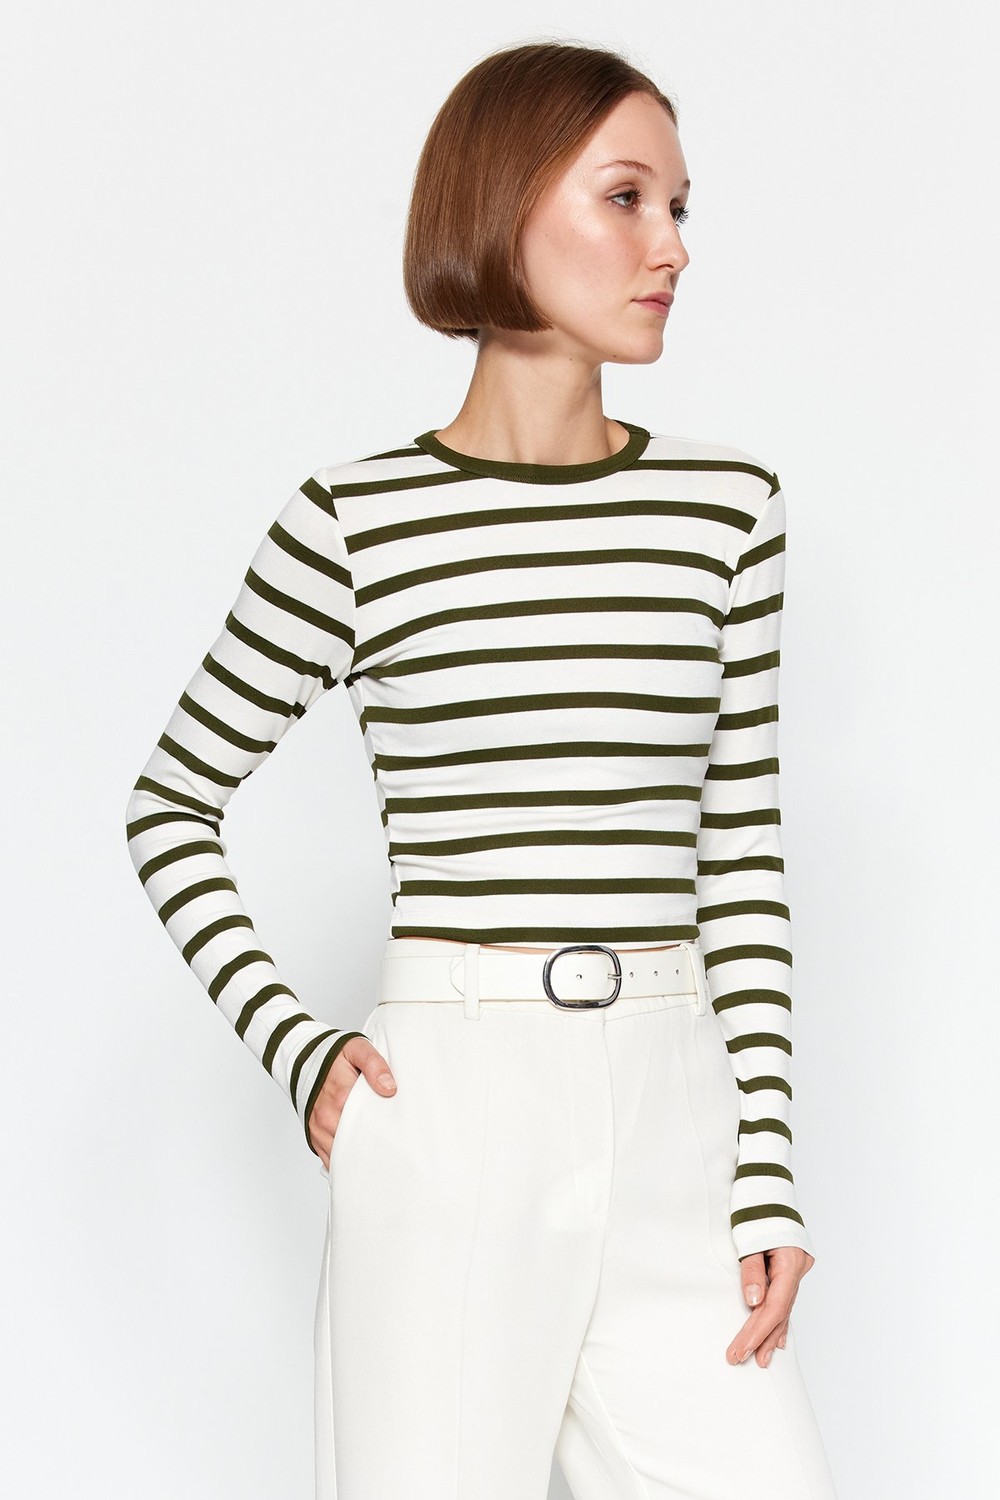 Trendyol Khaki Stripe Premium Viscose Soft Fabric Fitted Crop Stretchy Knitted Blouse